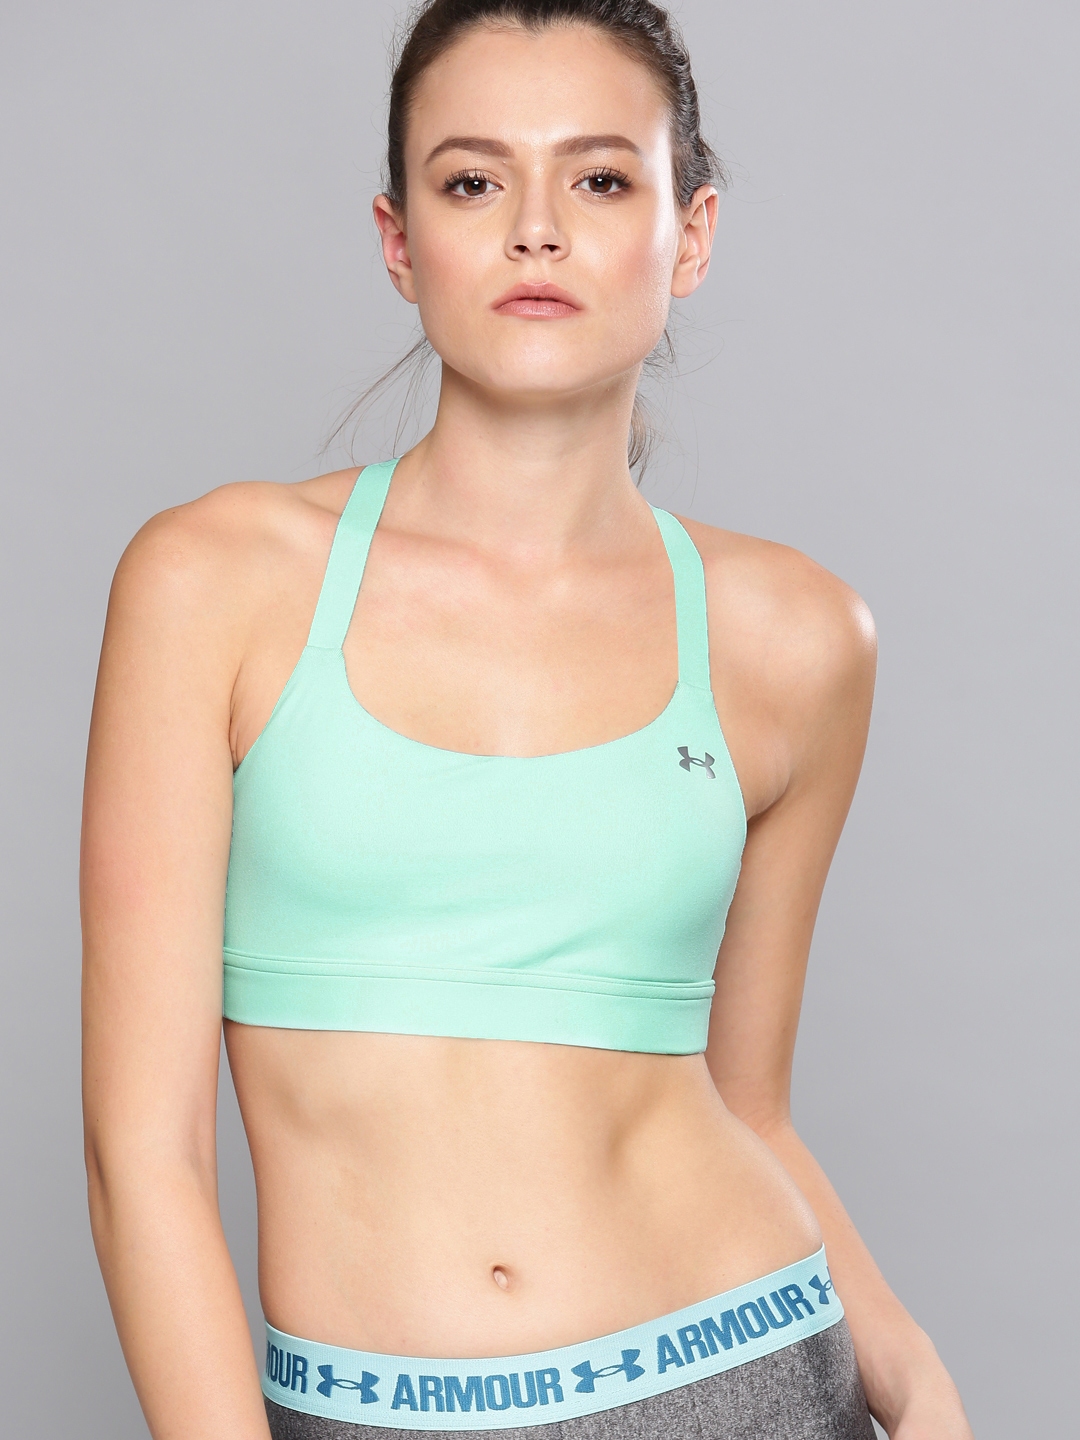 UNDER ARMOUR Intimates Green Ribbed Strappy Light India